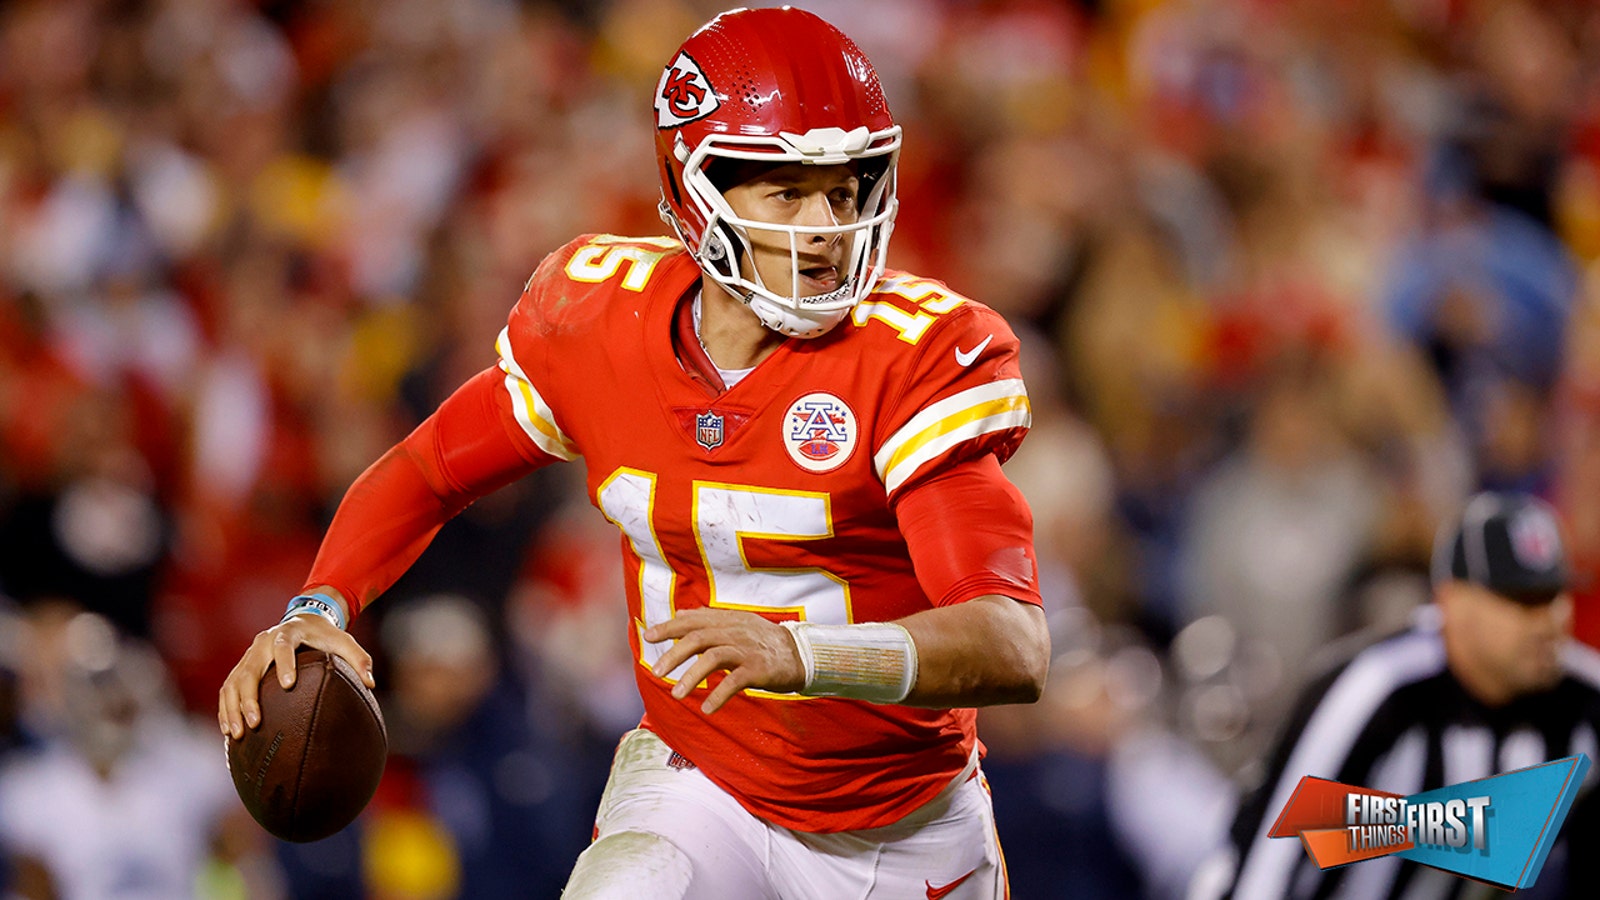 Patrick Mahomes, Chiefs def. Titans in OT, KC 1st in AFC West |  The important things first